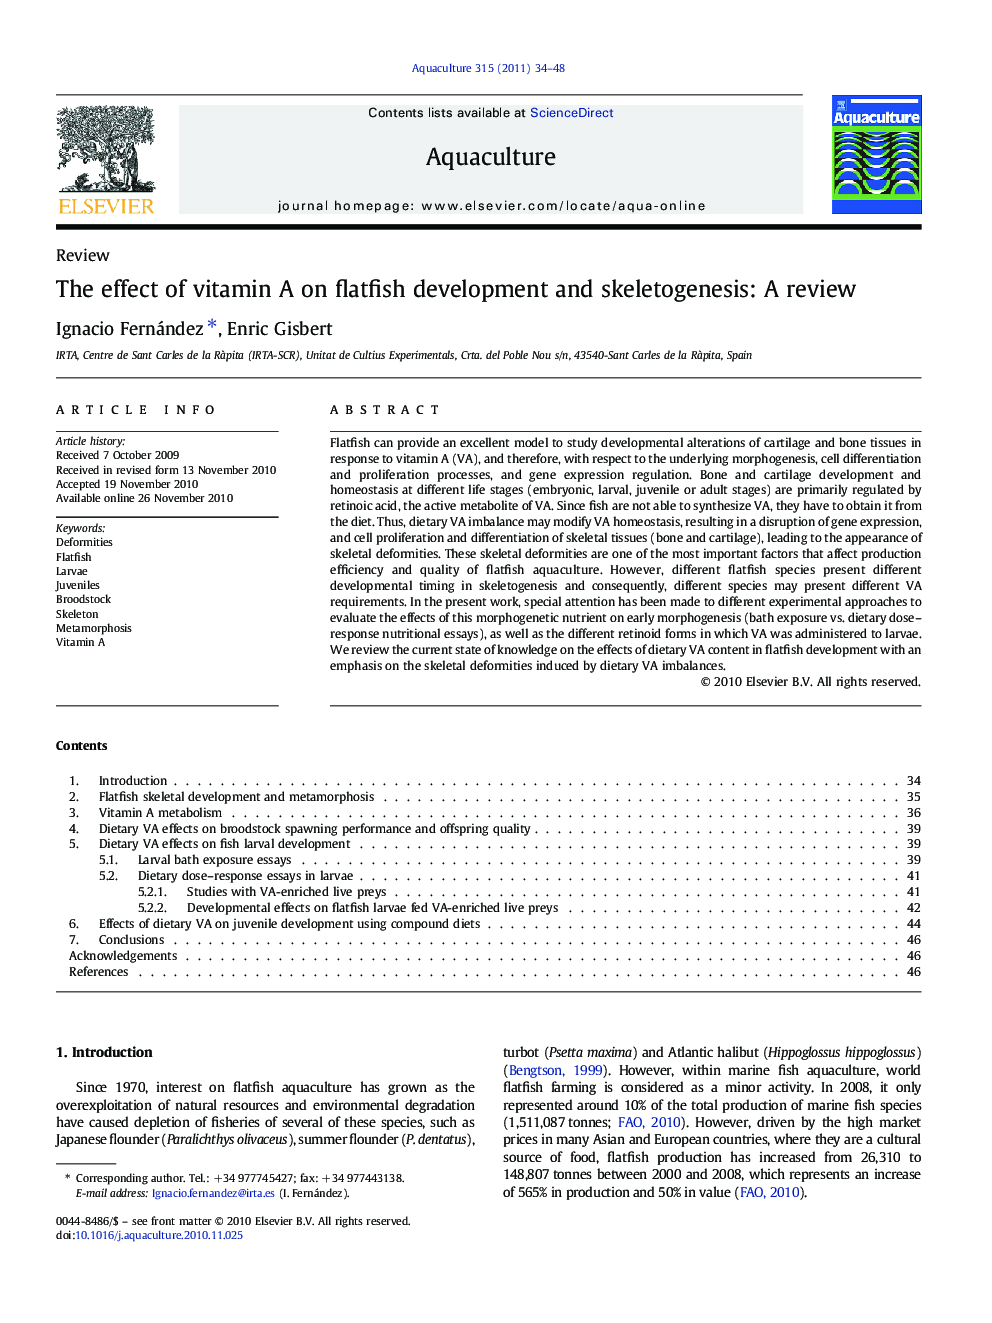 The effect of vitamin A on flatfish development and skeletogenesis: A review